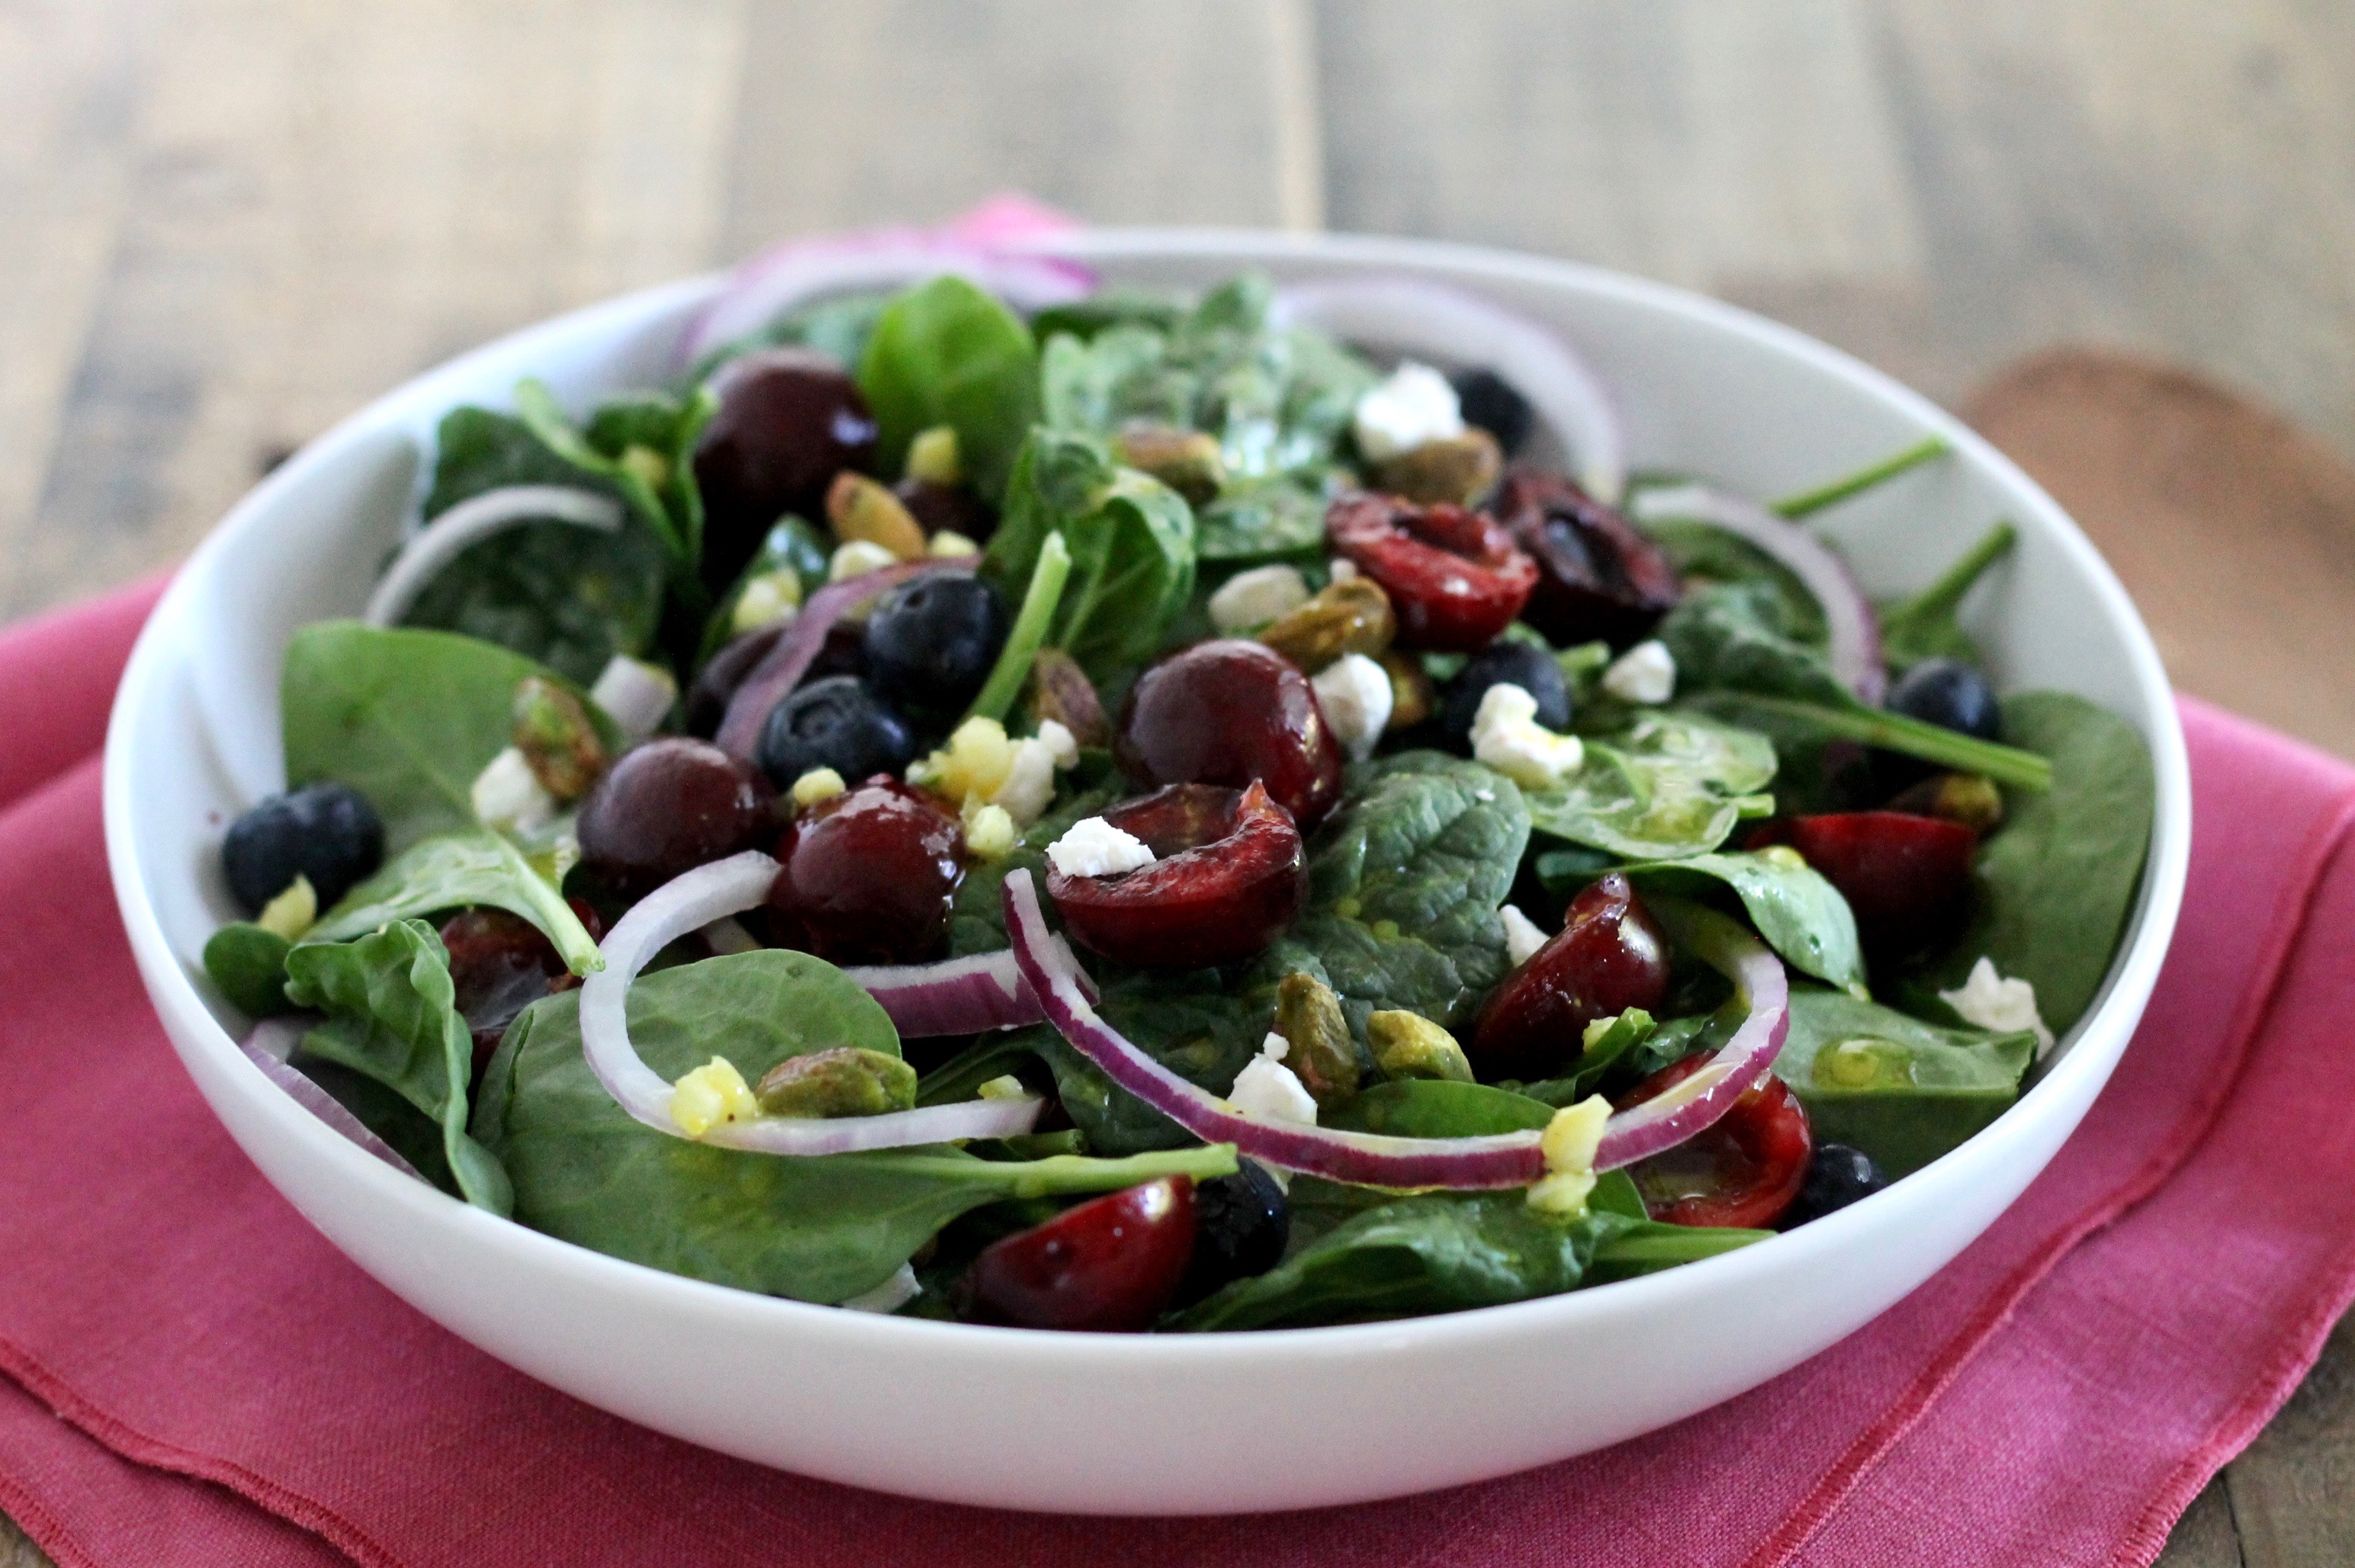 Spinach Salad with Cherries, Goat Cheese and Pistachios. A light and delicious summer salad recipe!